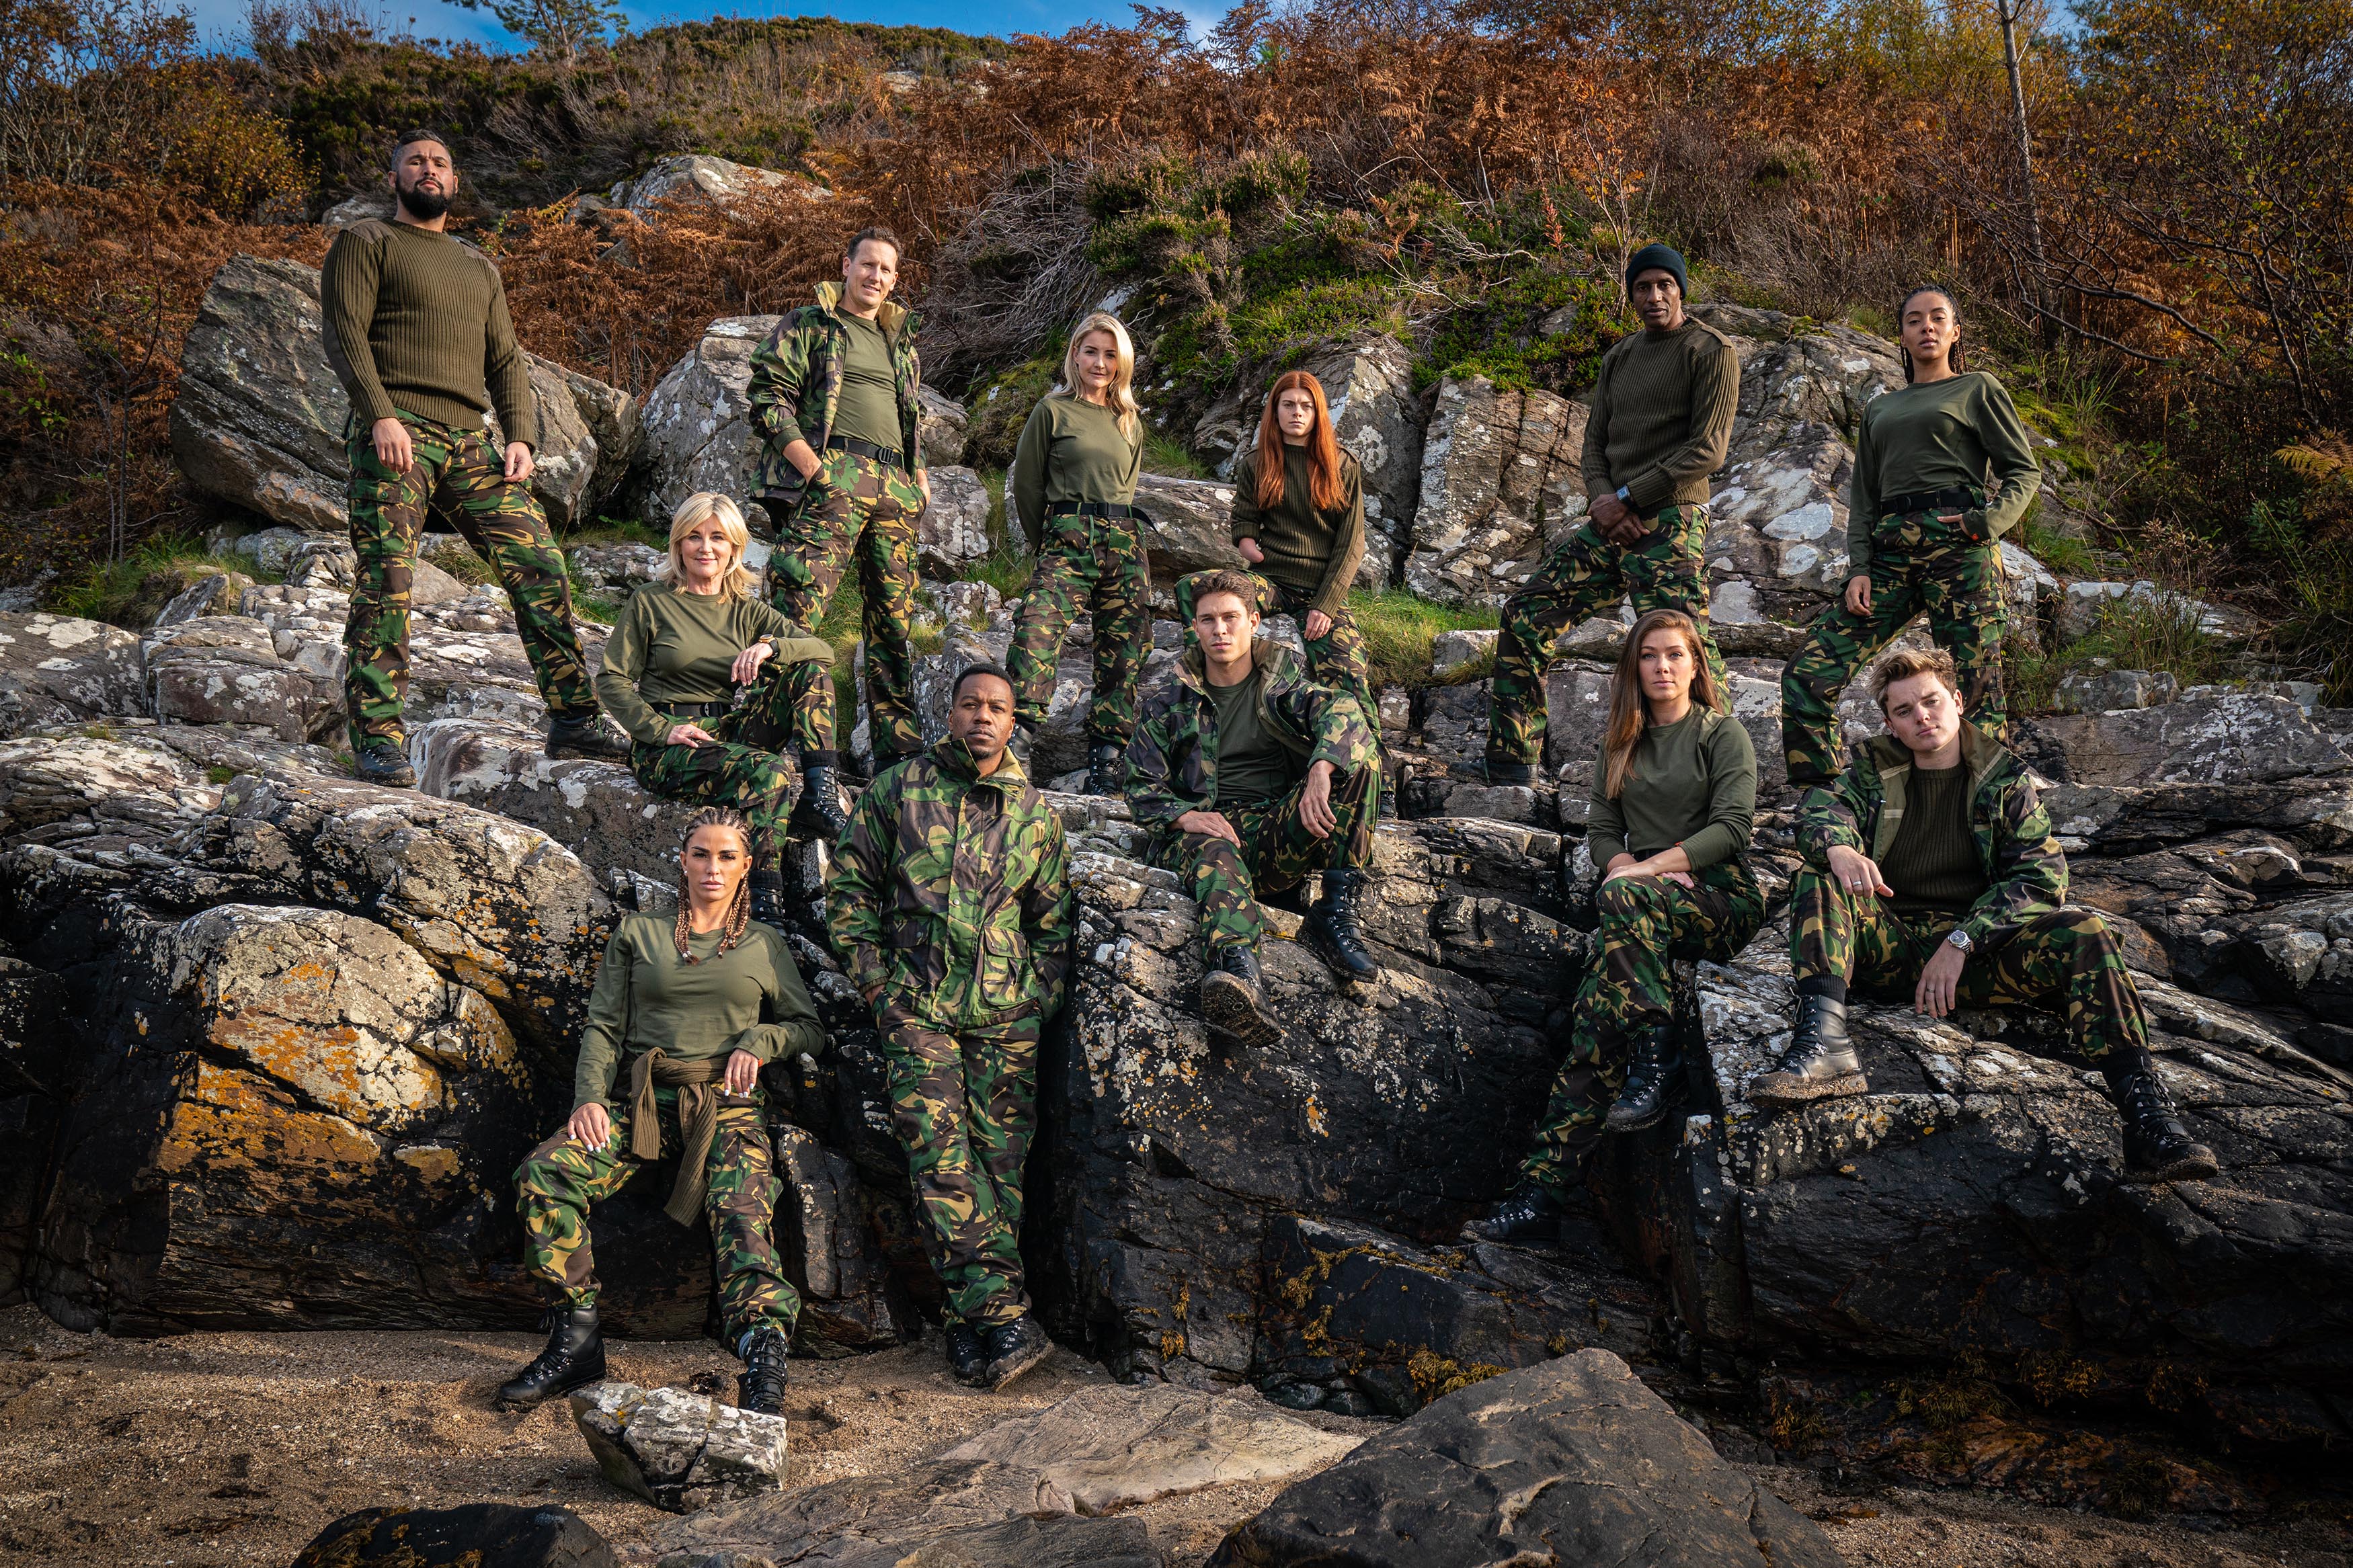 Who's taking part in Celebrity SAS: Who Dares Wins?